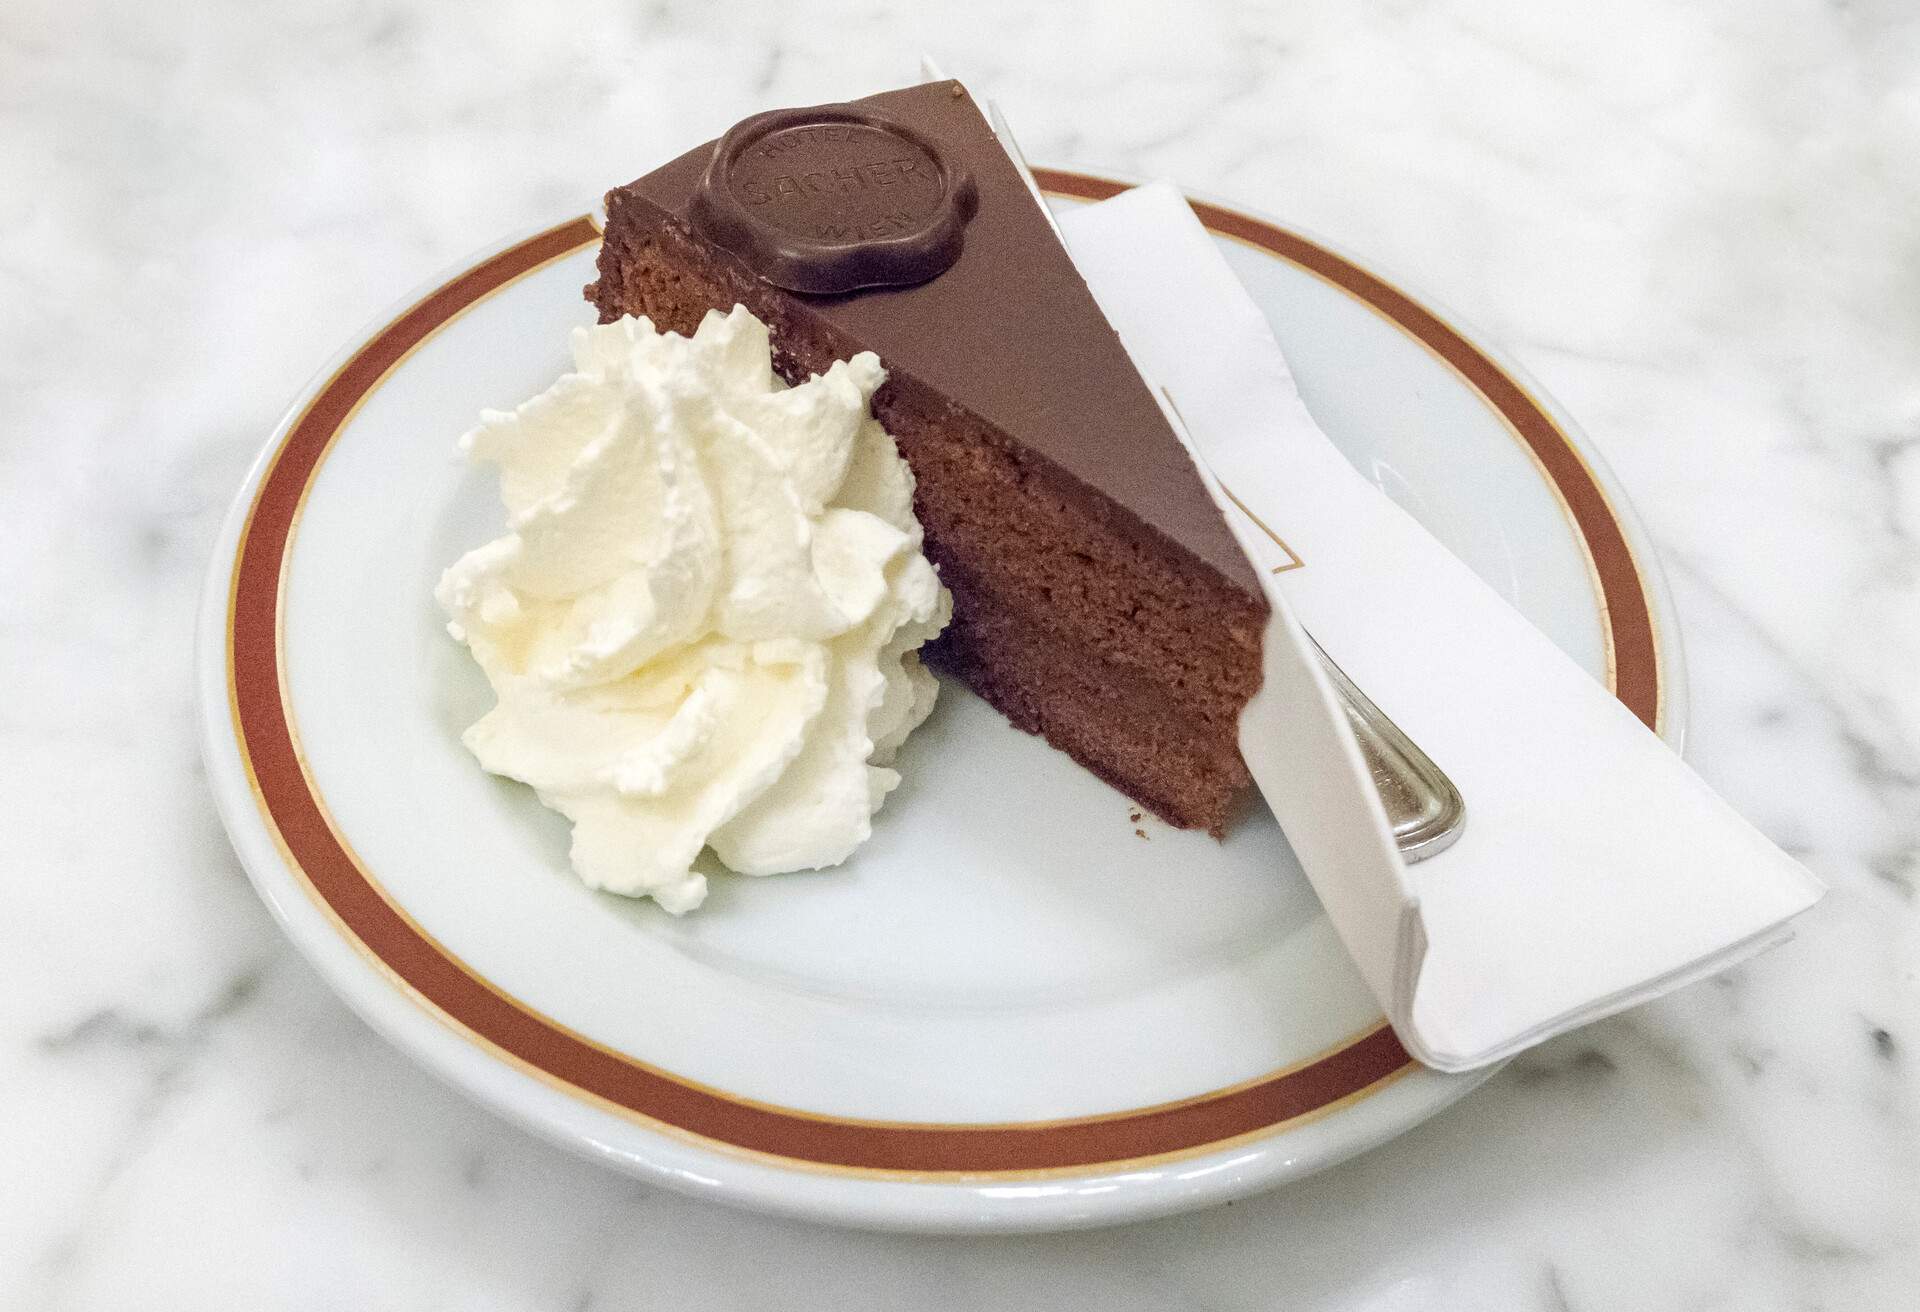 Slice of Sachertorte with whipped cream , at Sacher Hotel pastryshop